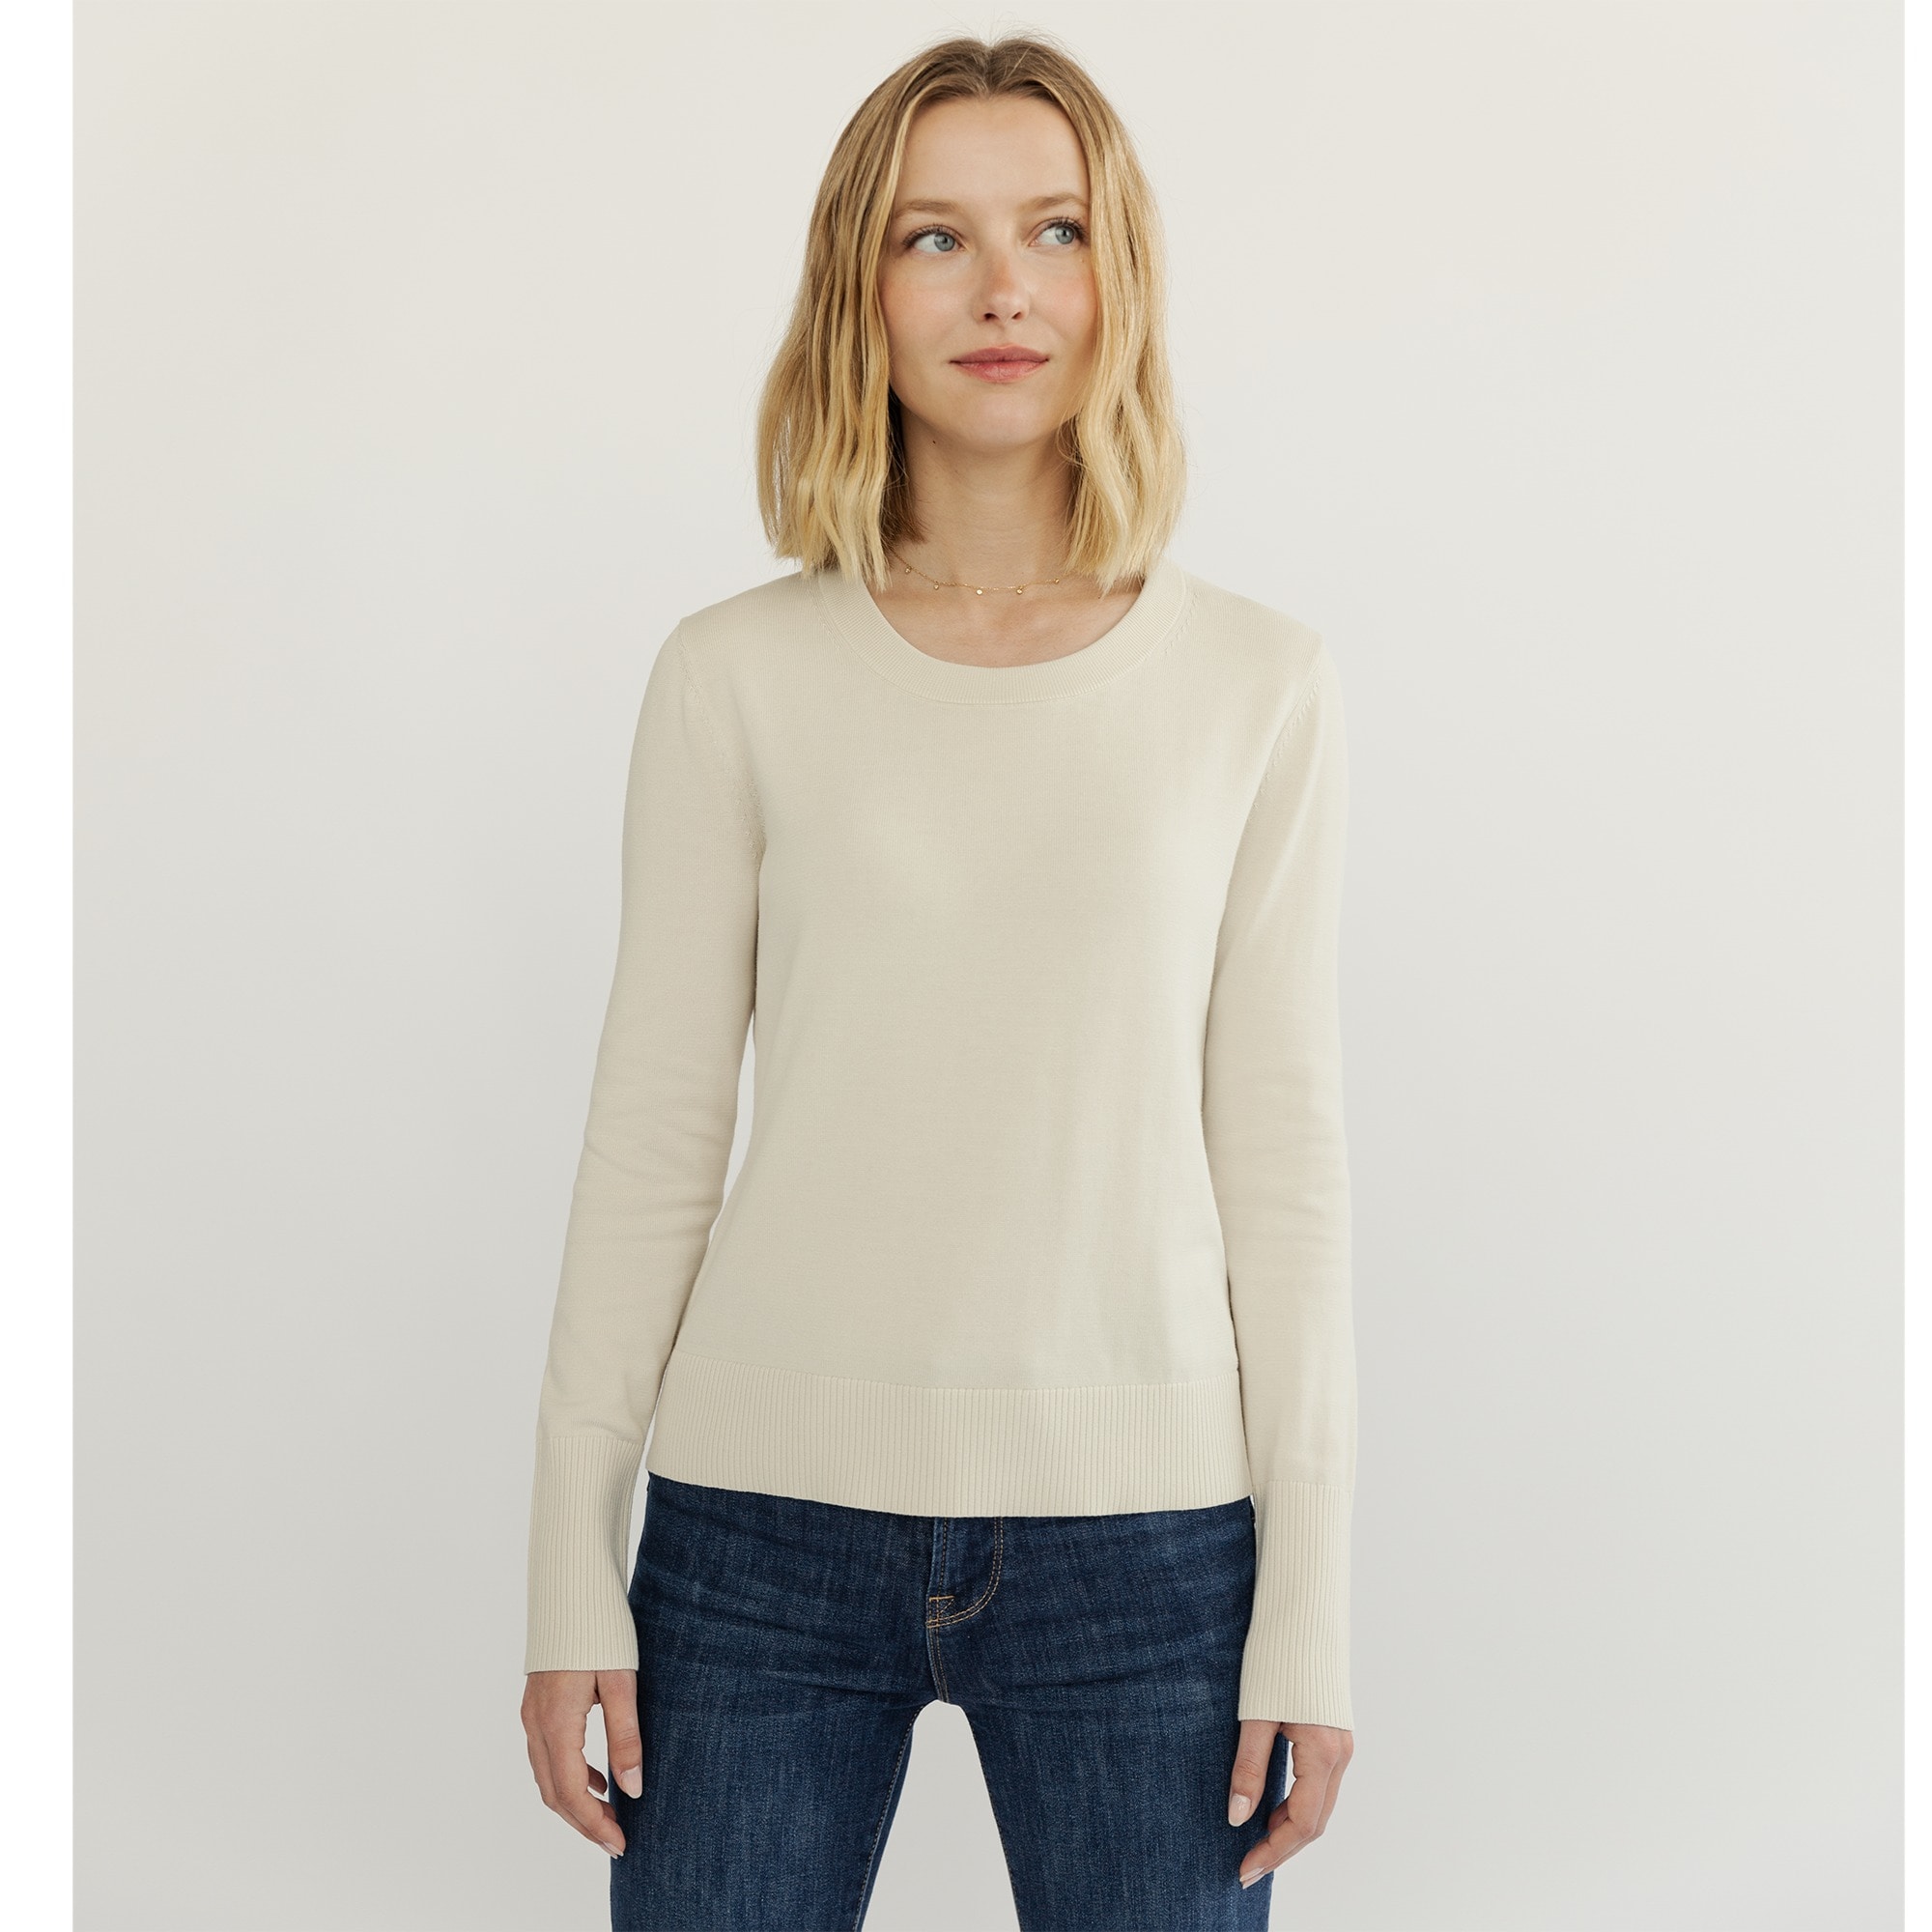 womens State of Cotton NYC Bryn crewneck